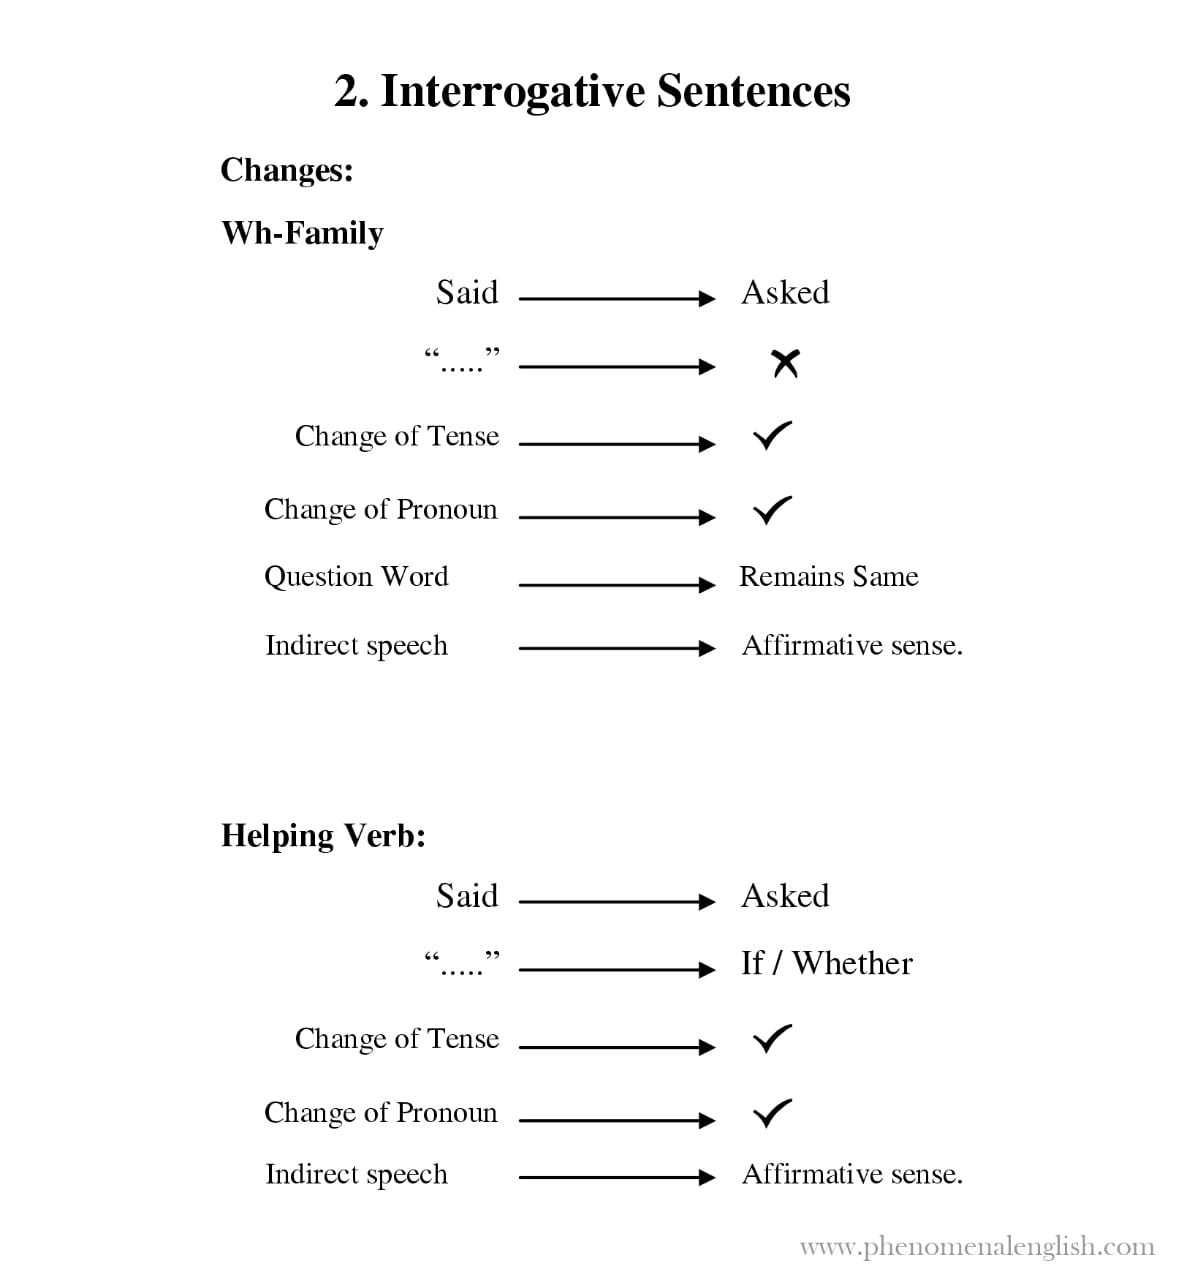 rules for change of interrogative sentences in direct and indirect